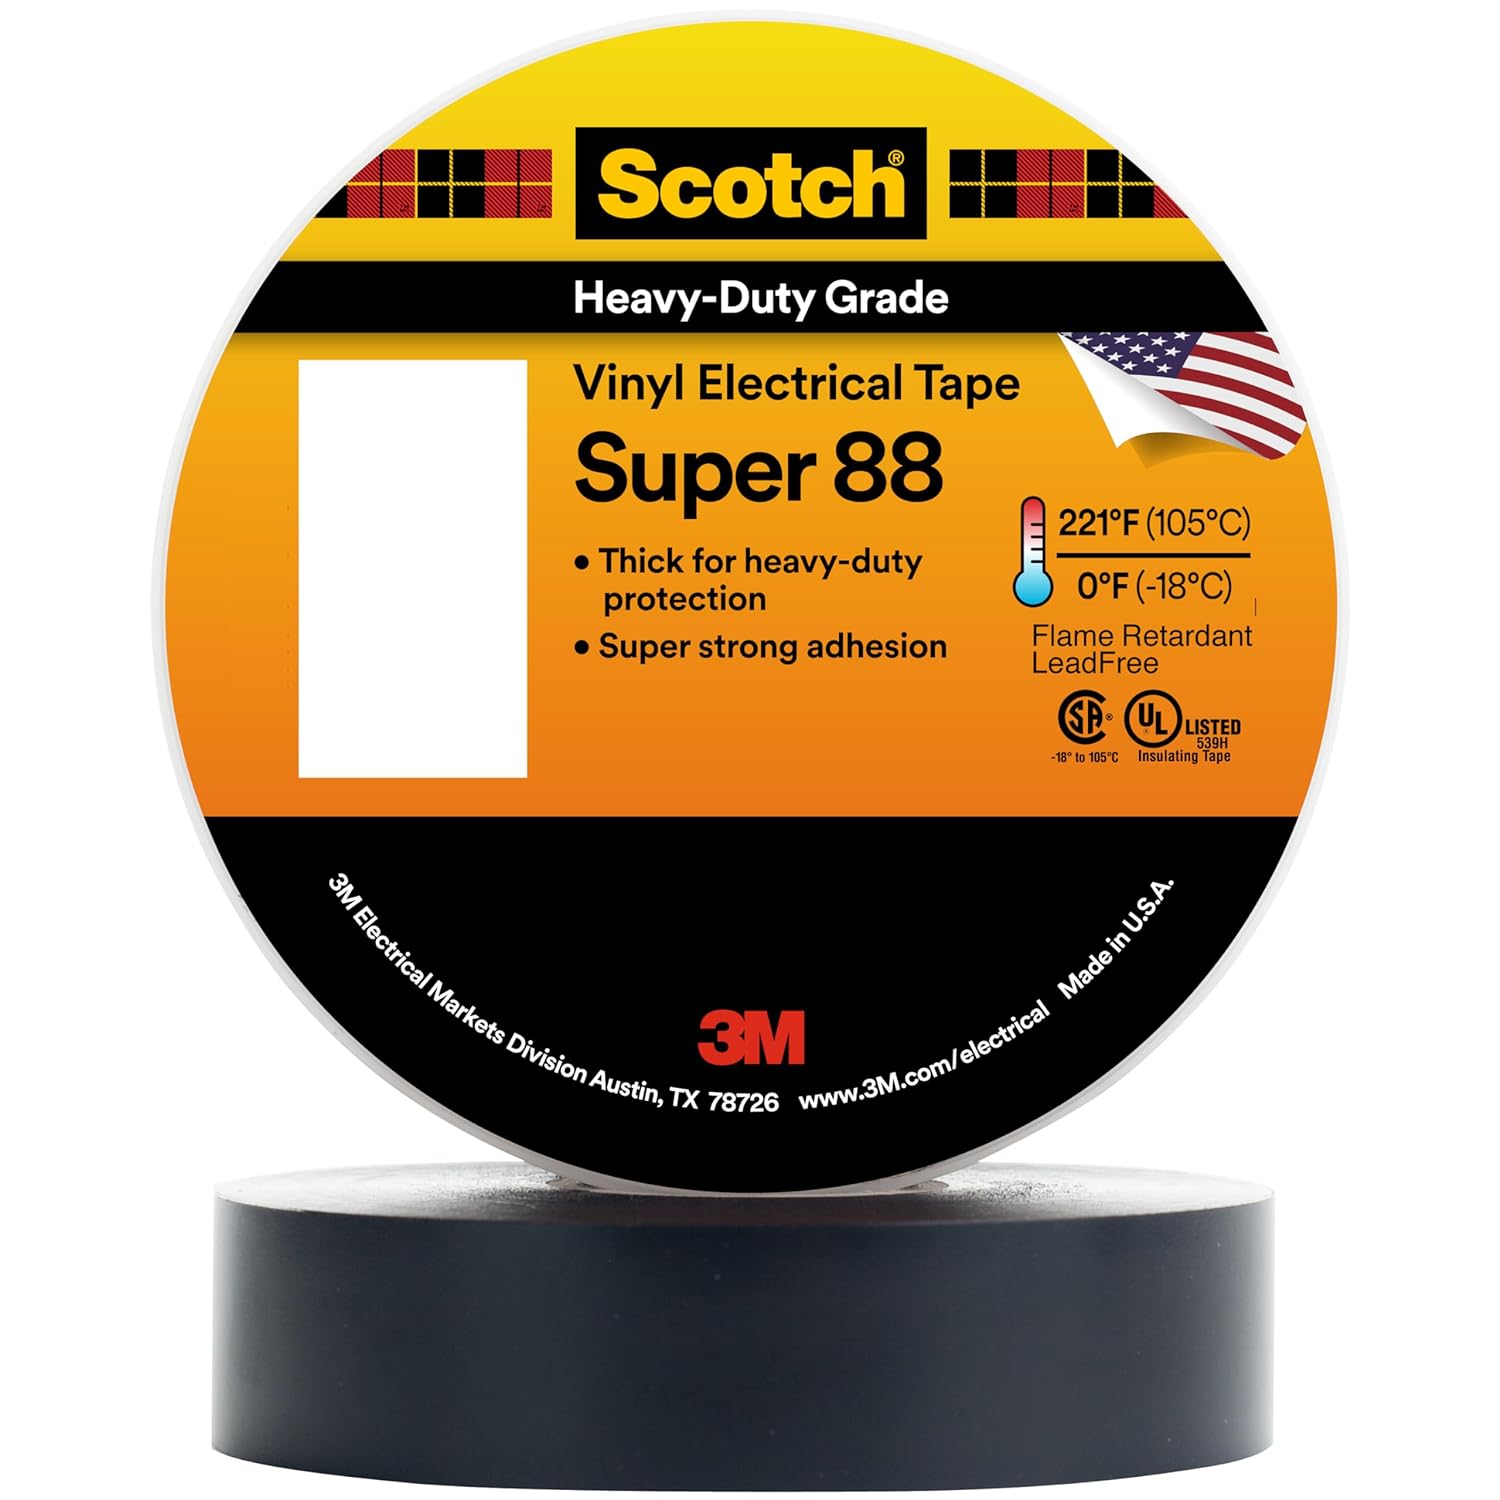 3M Scotch Vinyl Electrical Tape Super 88, 3/4 in x 36 yd (108 ft), Black, 1 Long Roll, Premium Grade, Rubber Resin Adhesive, PVC Backing, All-Season Heavy Duty Electric T - $6.98